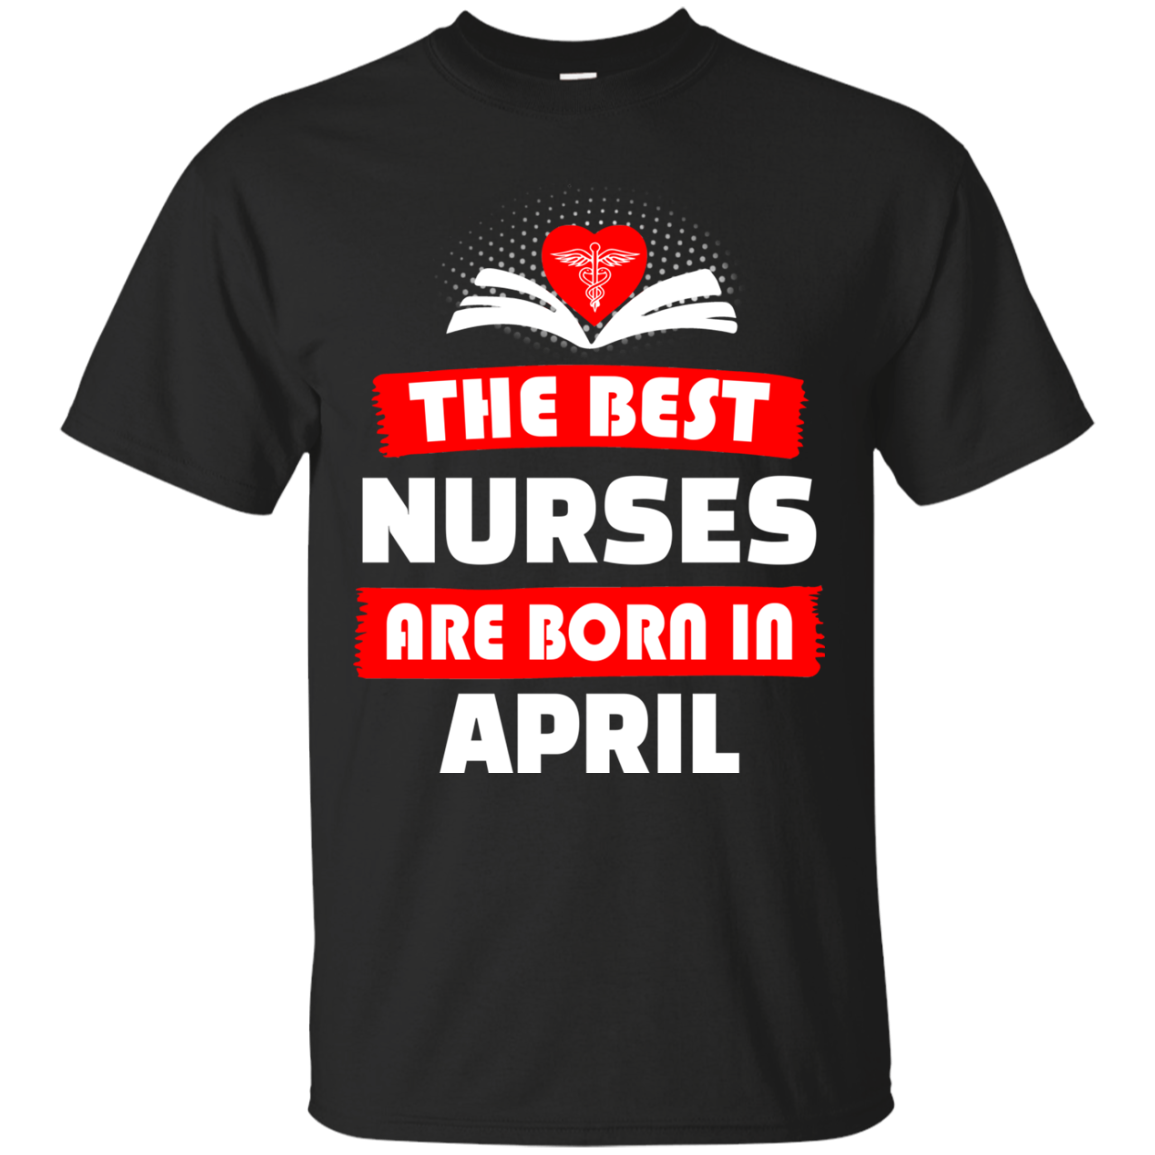 The best Nurses are born in April shirt, hoodie, tank